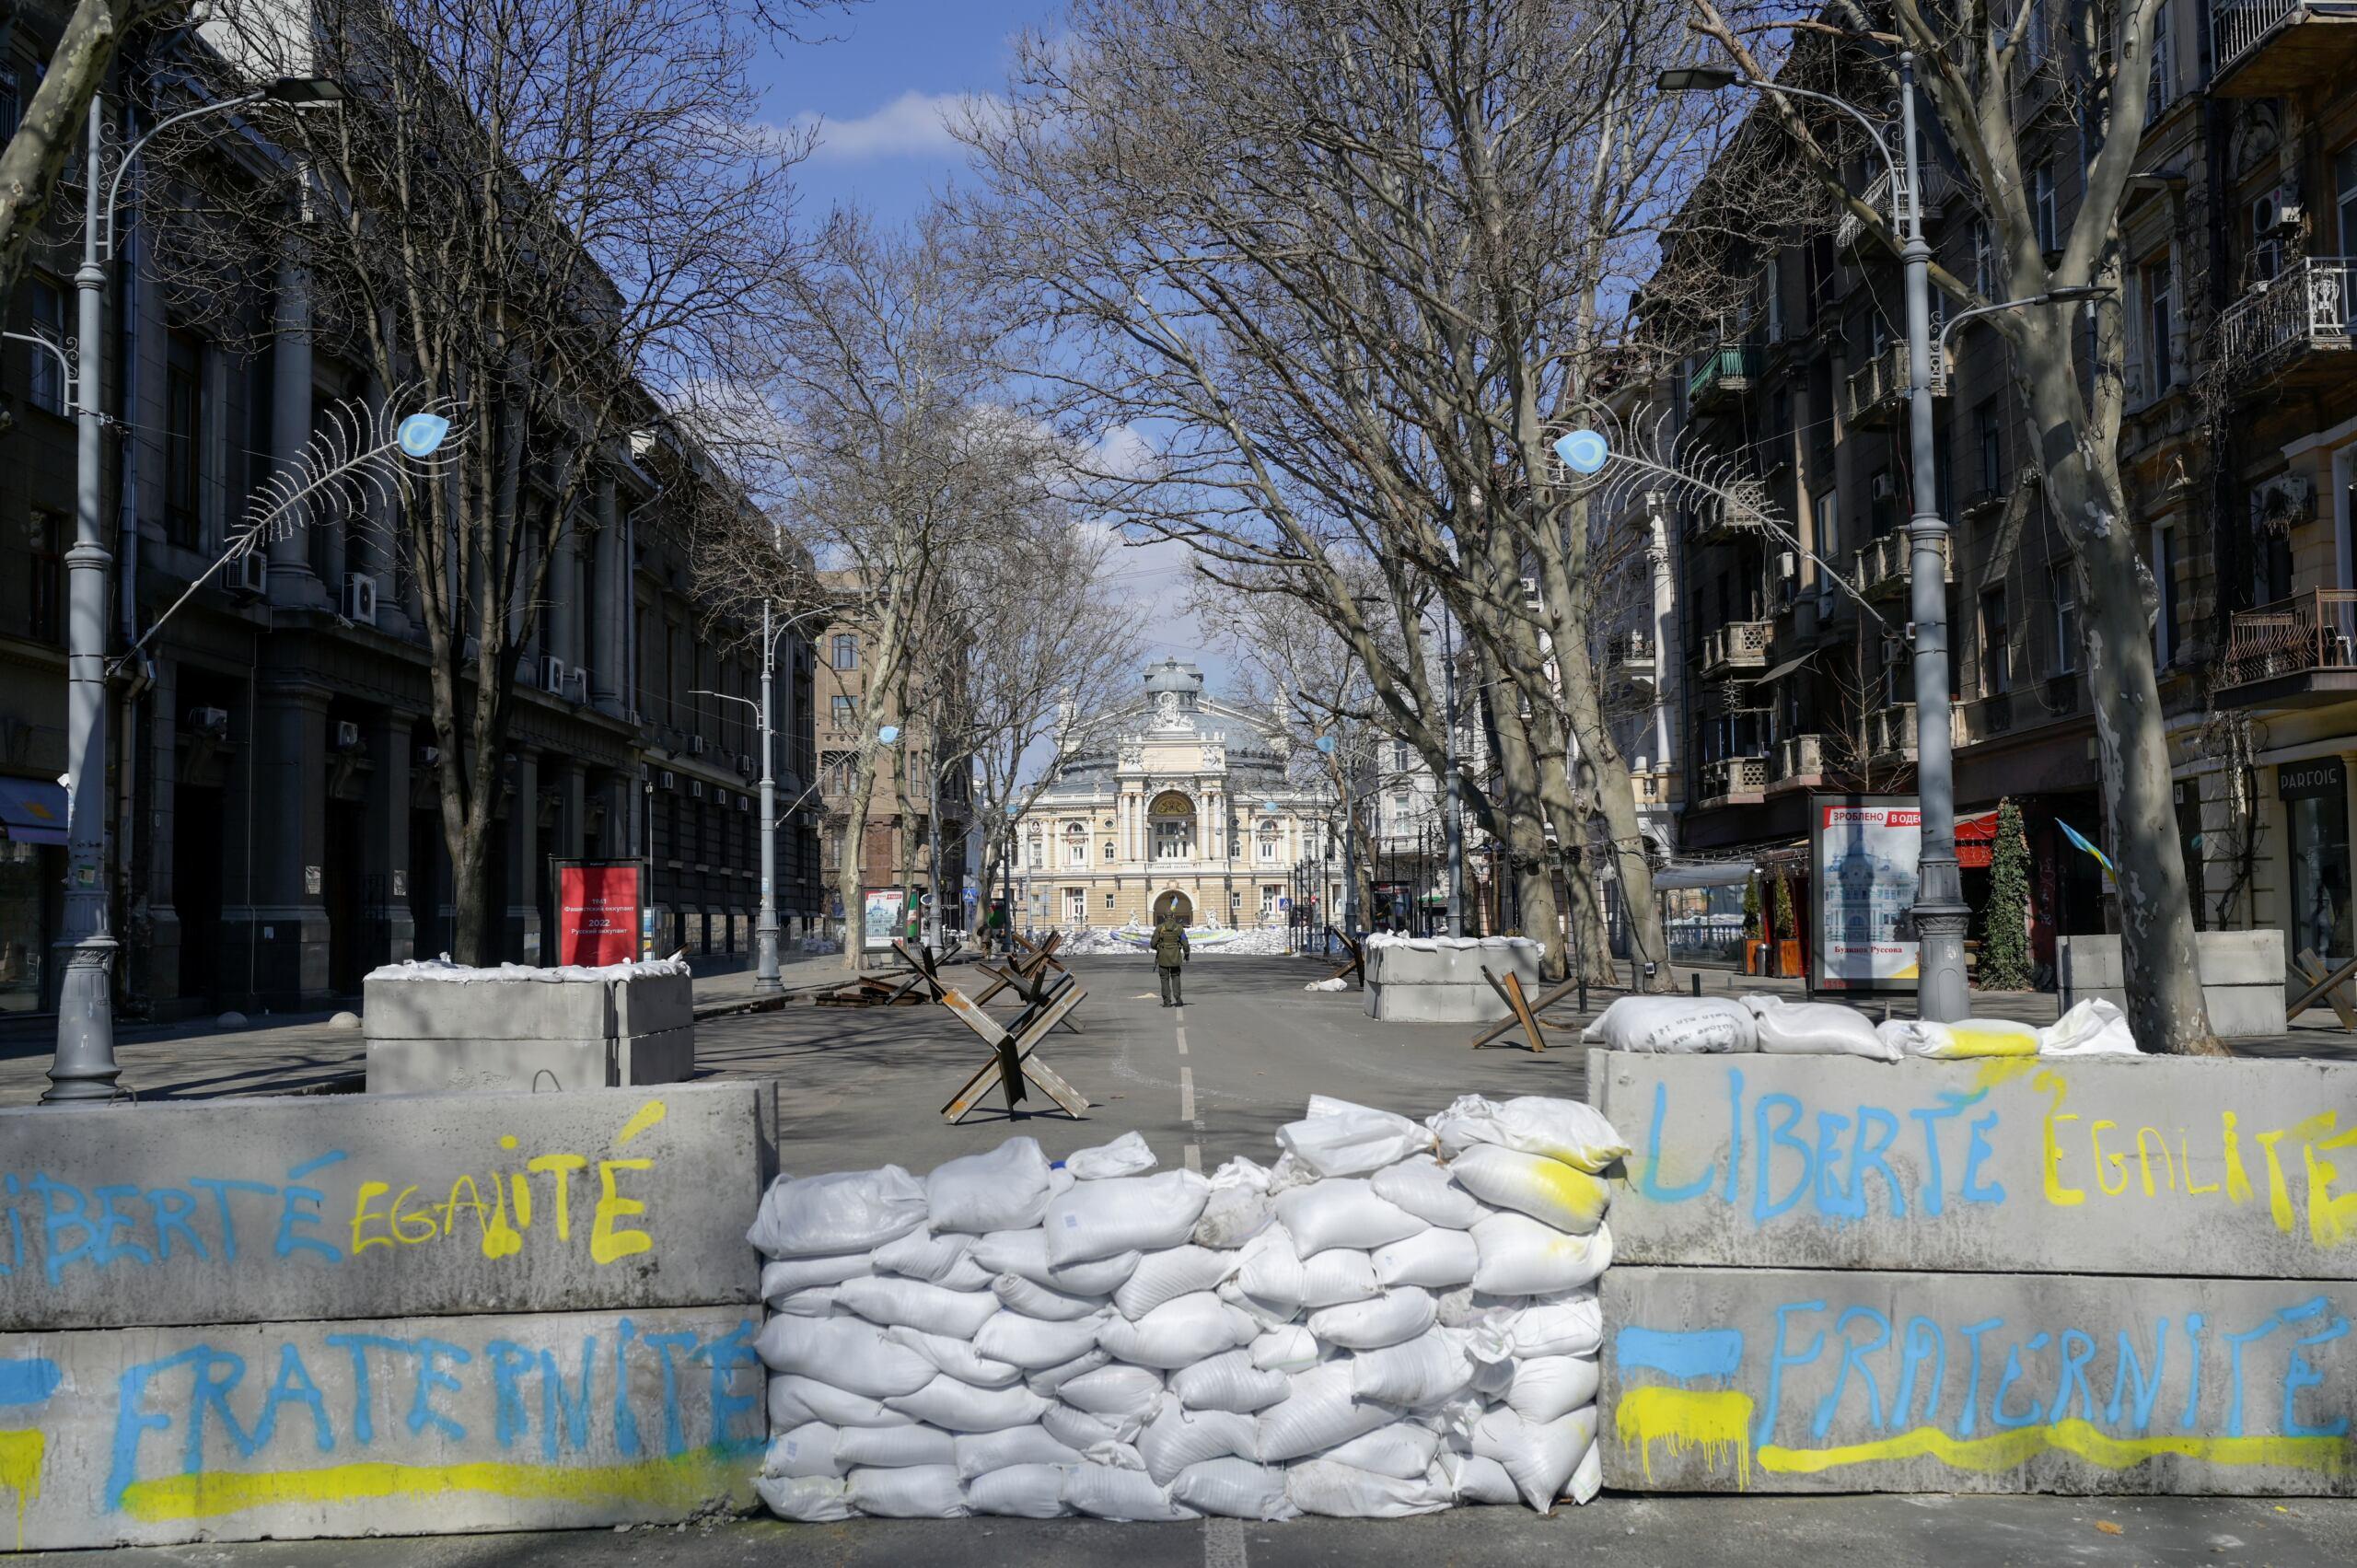 Concrete blocks with French national motto "liberty, equality, fraternity" written on it 
form a barricade in front of the National Academic Theater of Opera and Ballet in Odessa on March 17, 2022. - Odessa, which Ukraine fears could be the next target of Russia's offensive in the south, is the country's main port and is vital for its economy. But the city of one million people close to the Romanian and Moldovan borders also holds a special place in the Russian imagination. (Photo by BULENT KILIC / AFP)